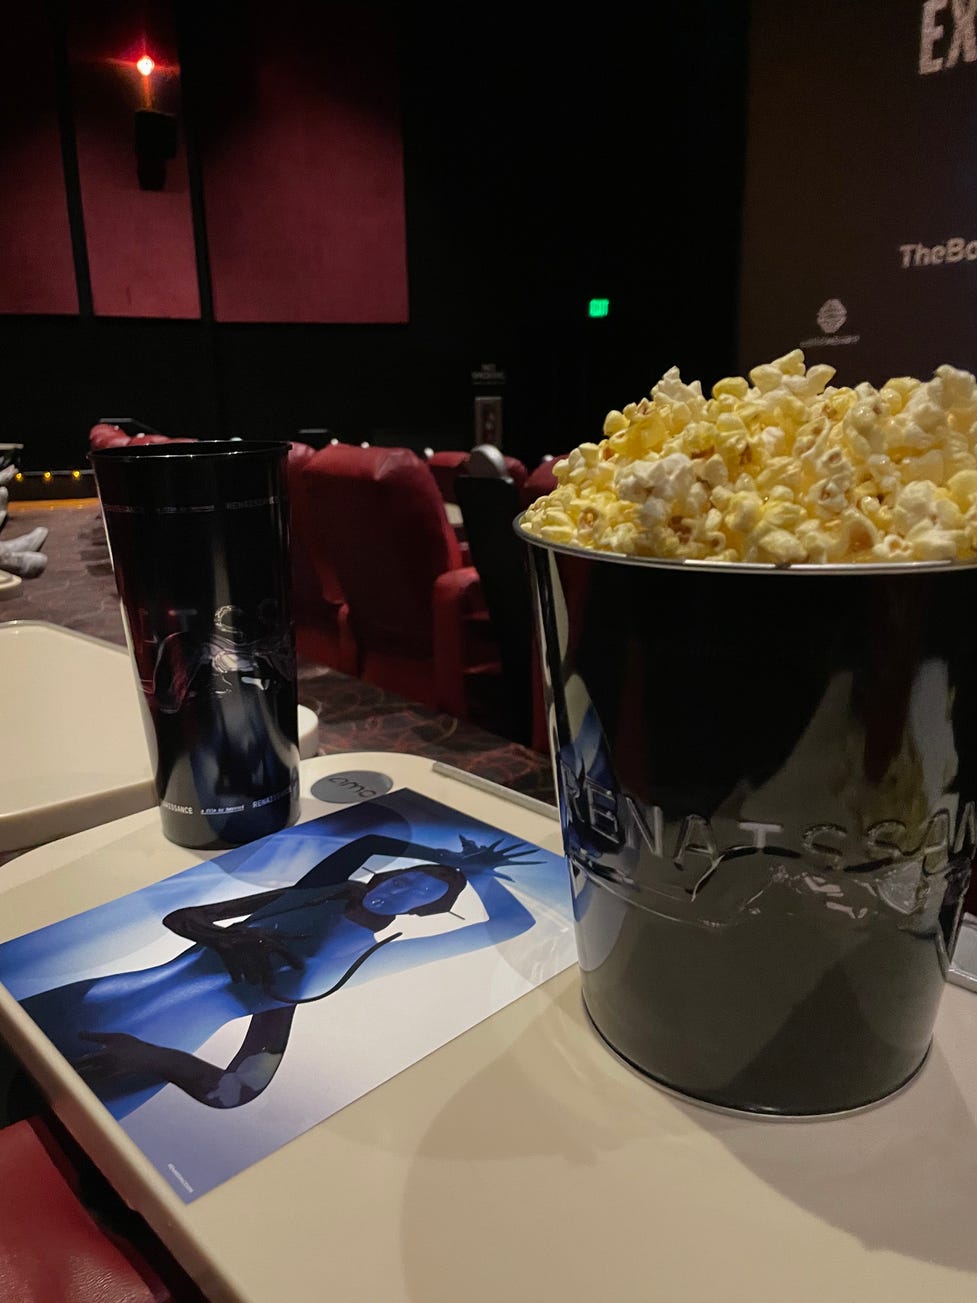 Do those Beyoncé popcorn buckets have long-term value? A memorabilia expert weighs in